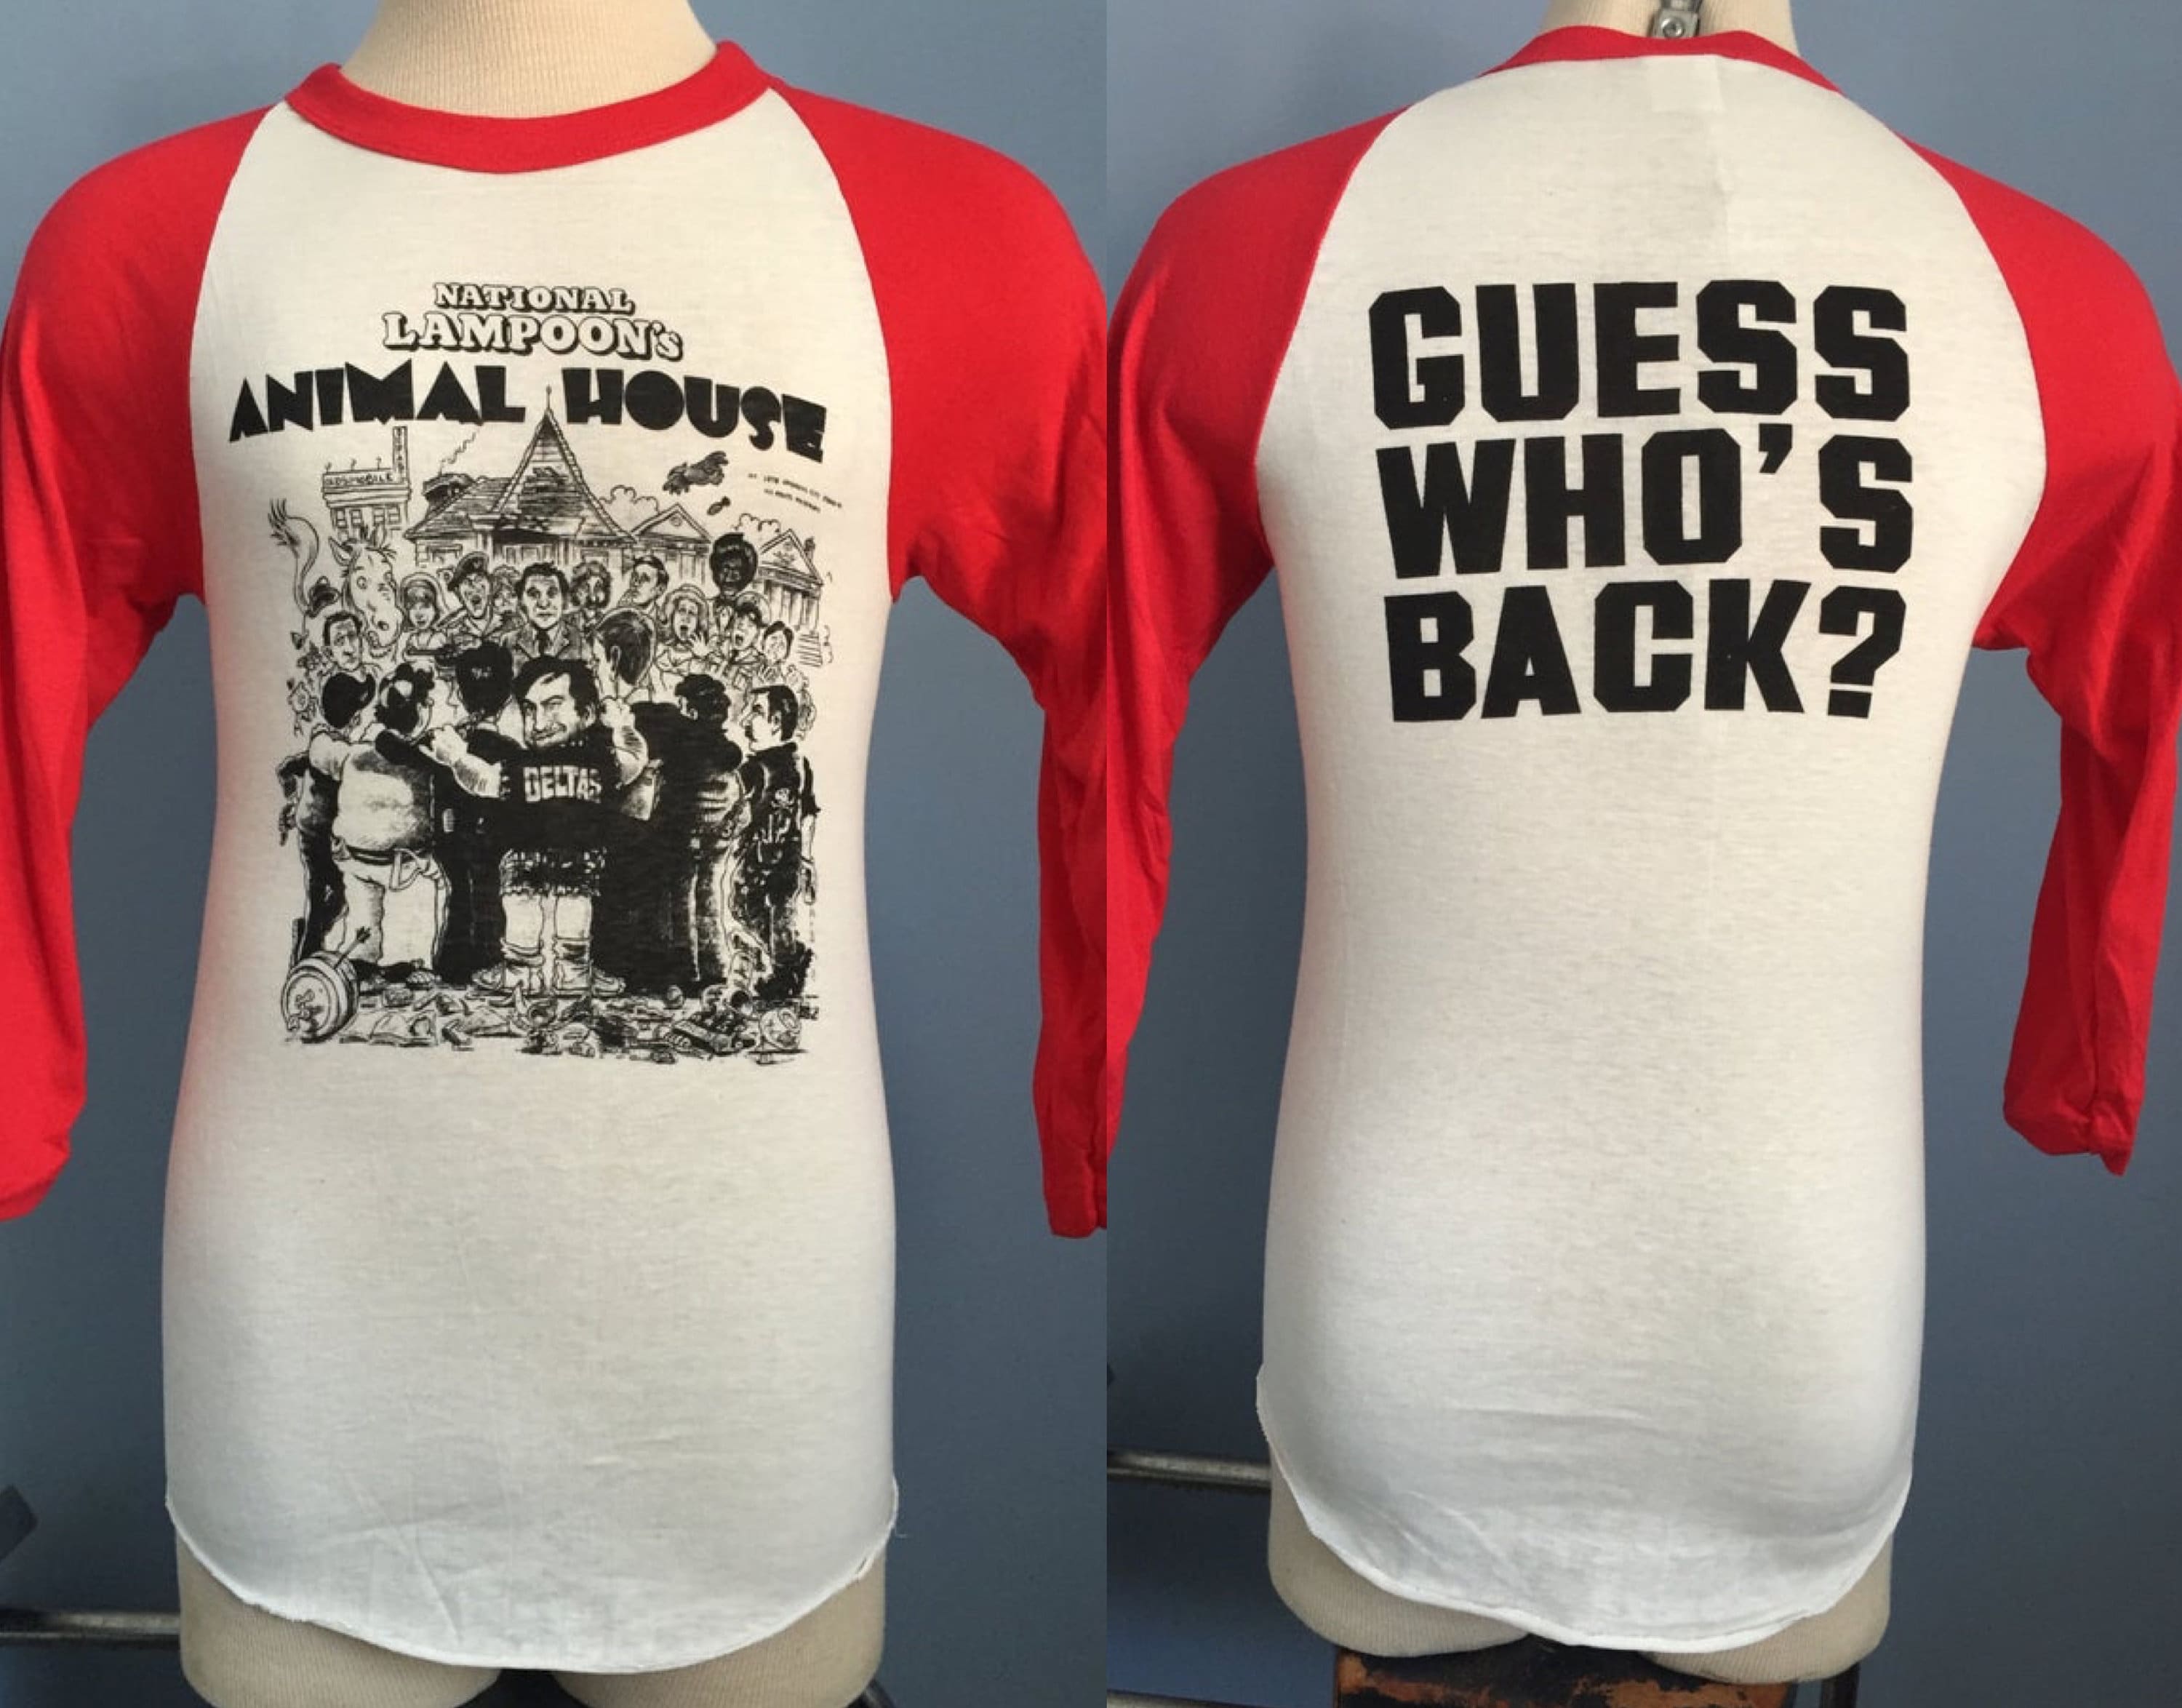 70s Vintage Animal House 1978 Guess